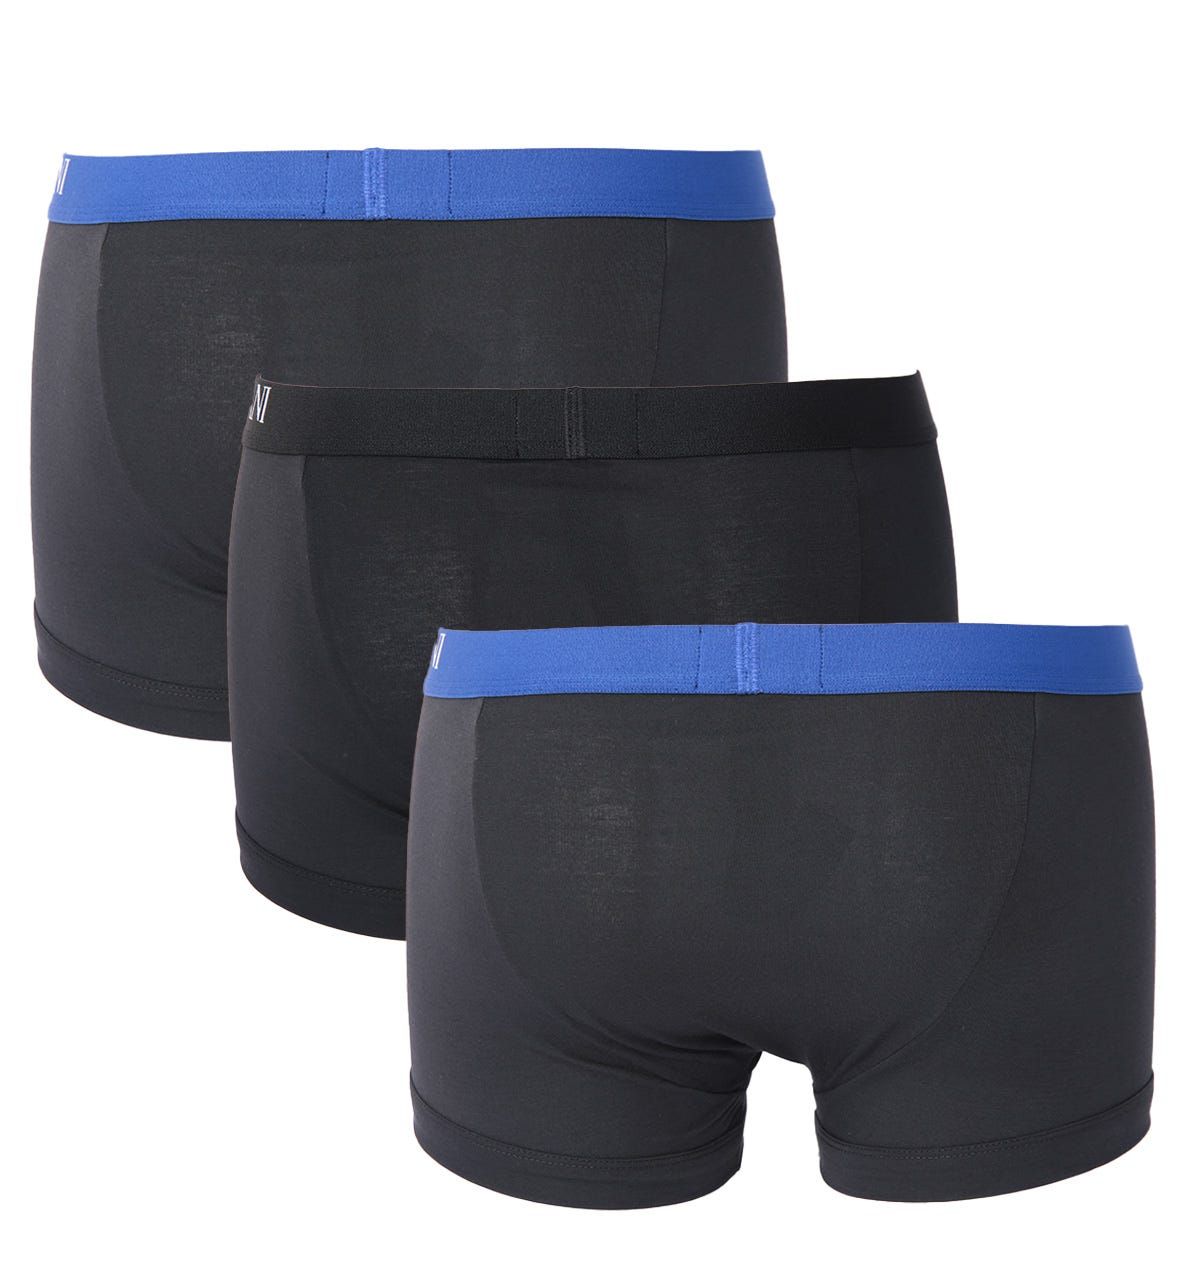 Elevate your everyday essentials this season with Emporio Armani Loungewear. This three-pack of boxer trunks is crafted from innovative soft touch eco fibre, ensuring day-long comfort with maximum ease of movement and breathability. Each pair is finished with Emporio Armani branding at the elasticated waistband.Three Pack, Soft Touch Eco Fibre, Box Packaging, 95% Recycled Polyester & 5% Elastane, Emporio Armani Branding.